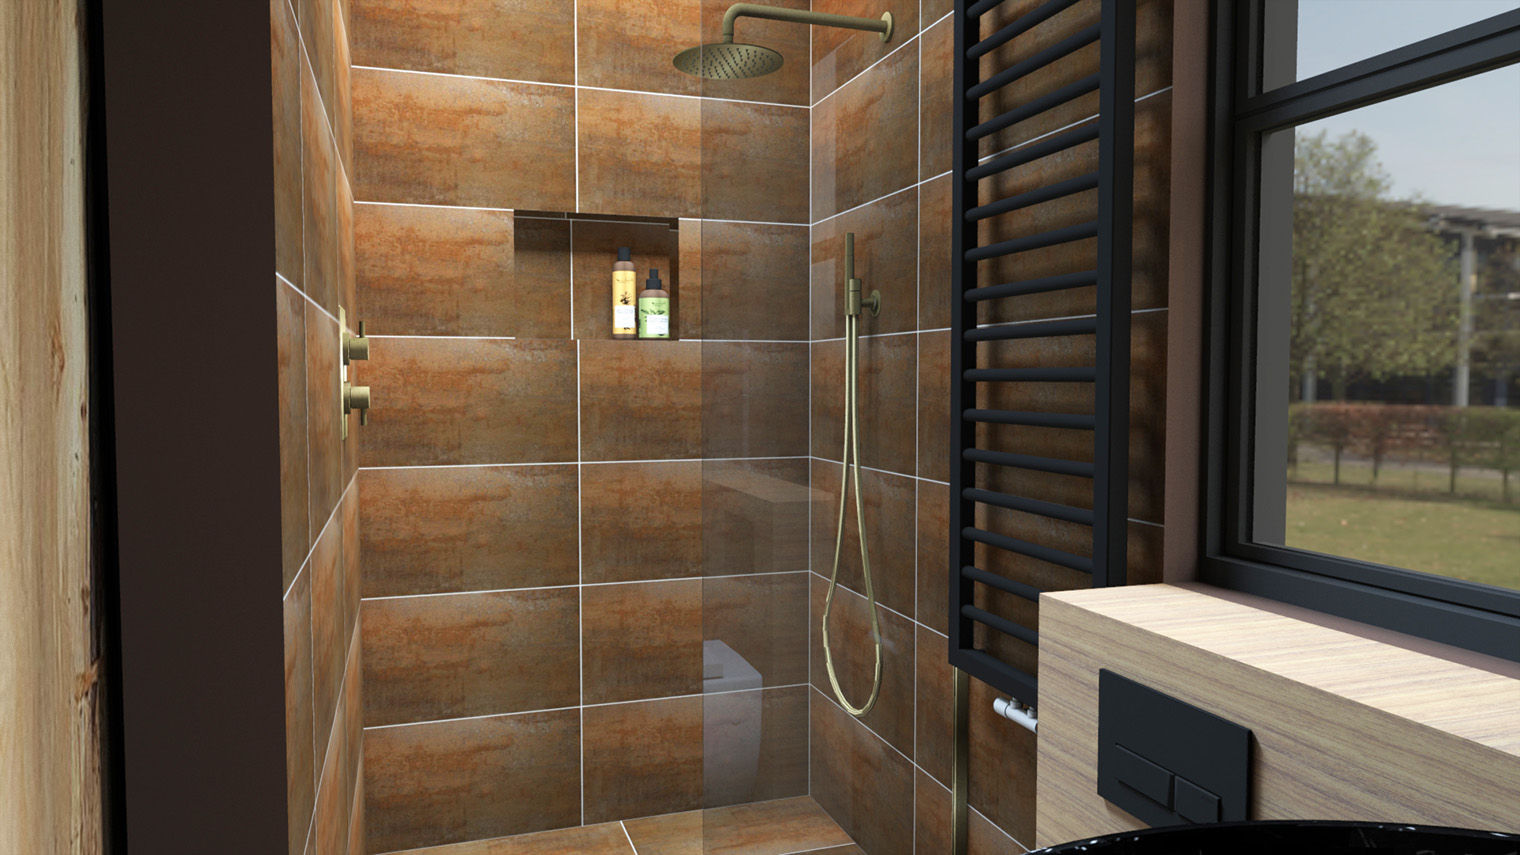 A computer generated image of the shower area in my bathroom design.